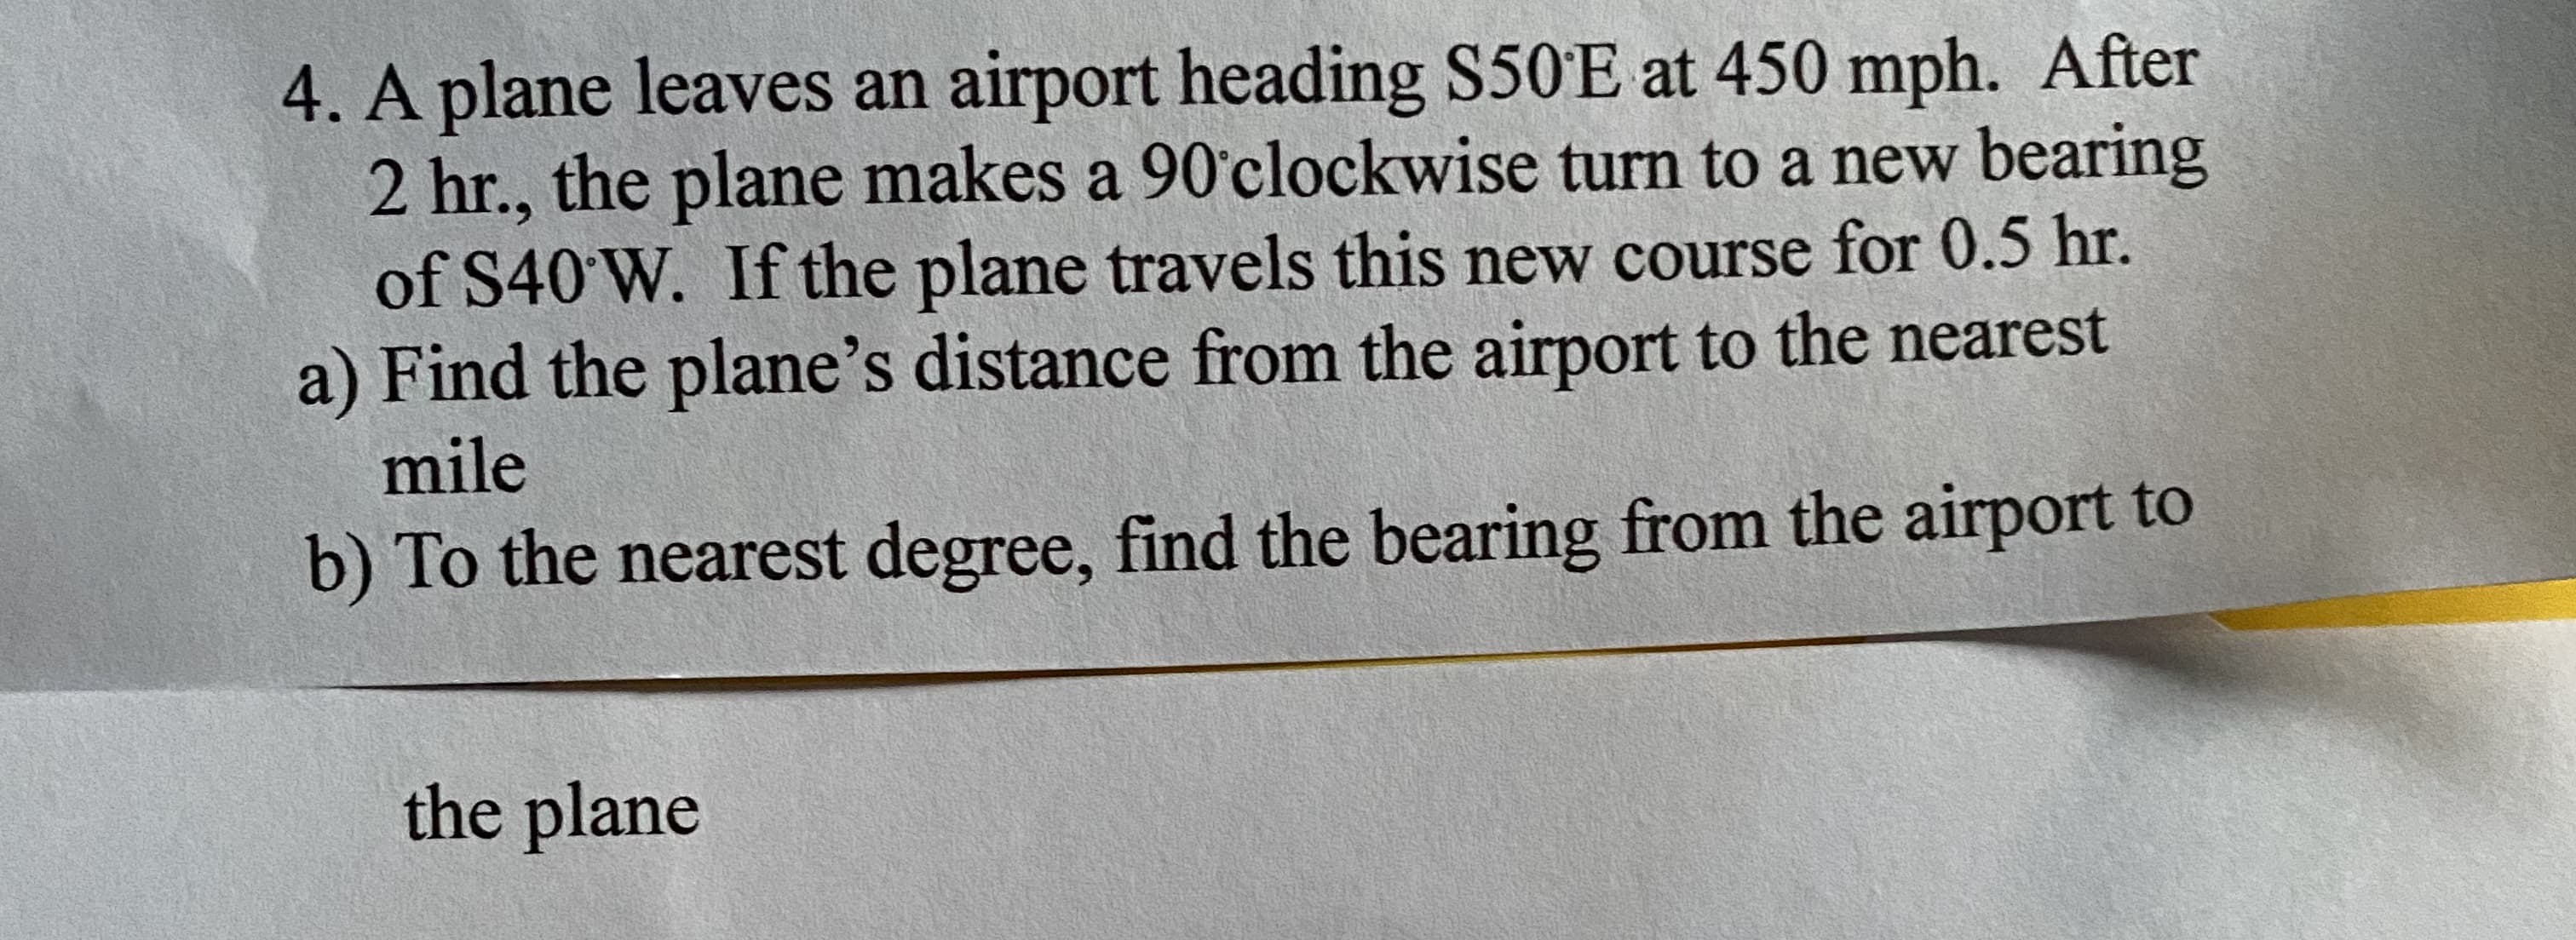 4. A plane leaves an airport heading S50'E at 450 mph. After
2 hr., the plane makes a 90'clockwise turn to a new bearing
of S40'W. If the plane travels this new course for 0.5 hr.
a) Find the plane's distance from the airport to the nearest
mile
b) To the nearest degree, find the bearing from the airport to
the plane
